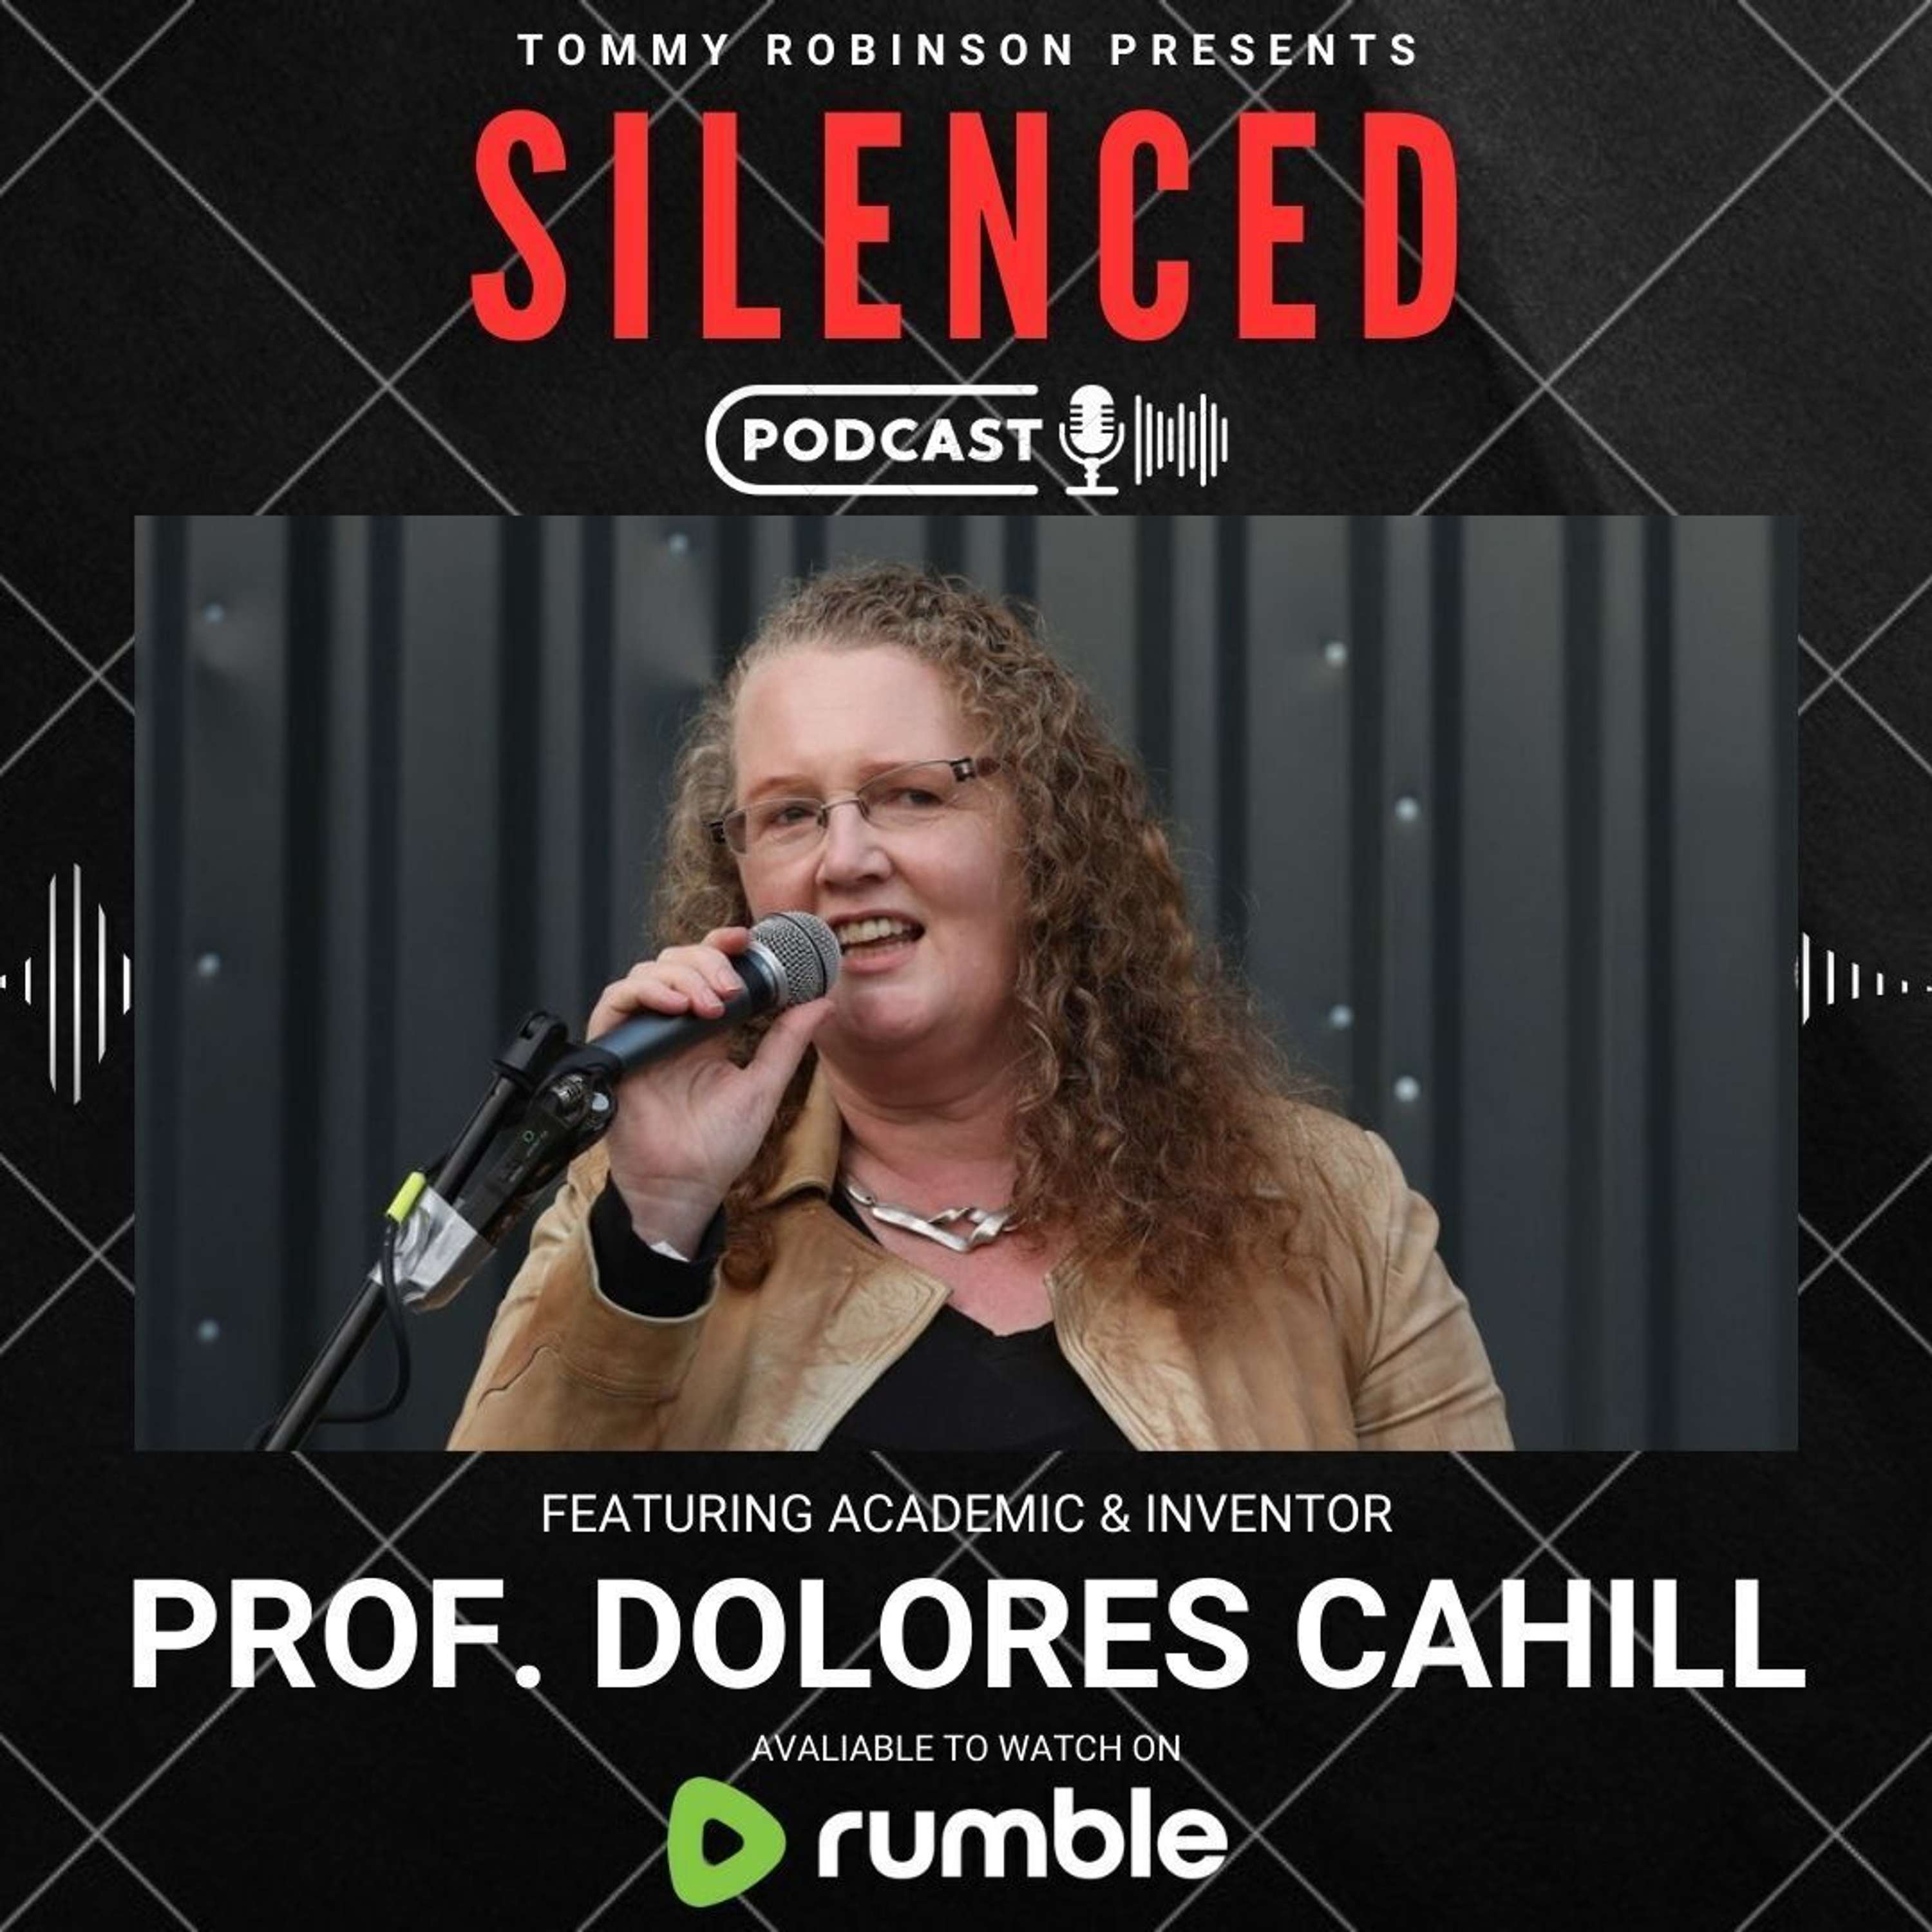 Episode 14 - SILENCED with Tommy Robinson - Dolores Cahill